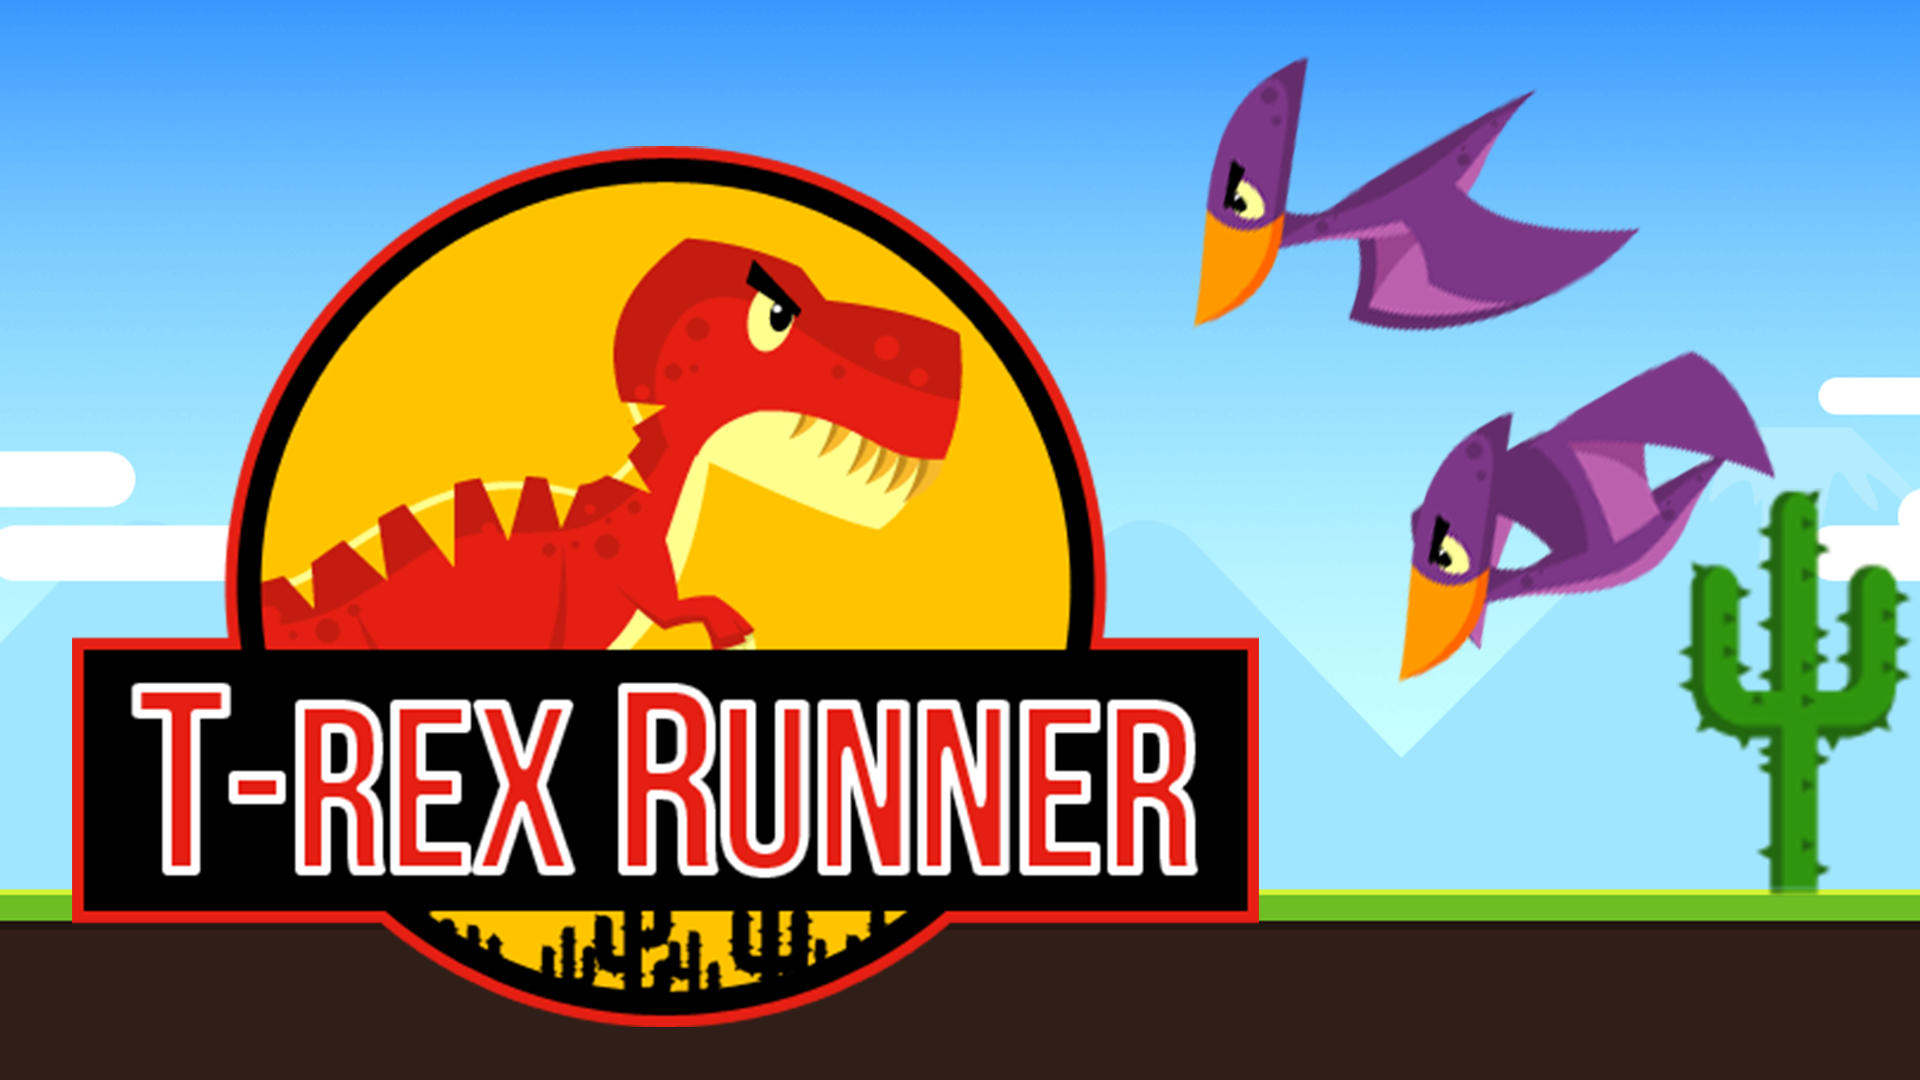 Endless Runner Games: Evolution and Future - Game AnalysisGame